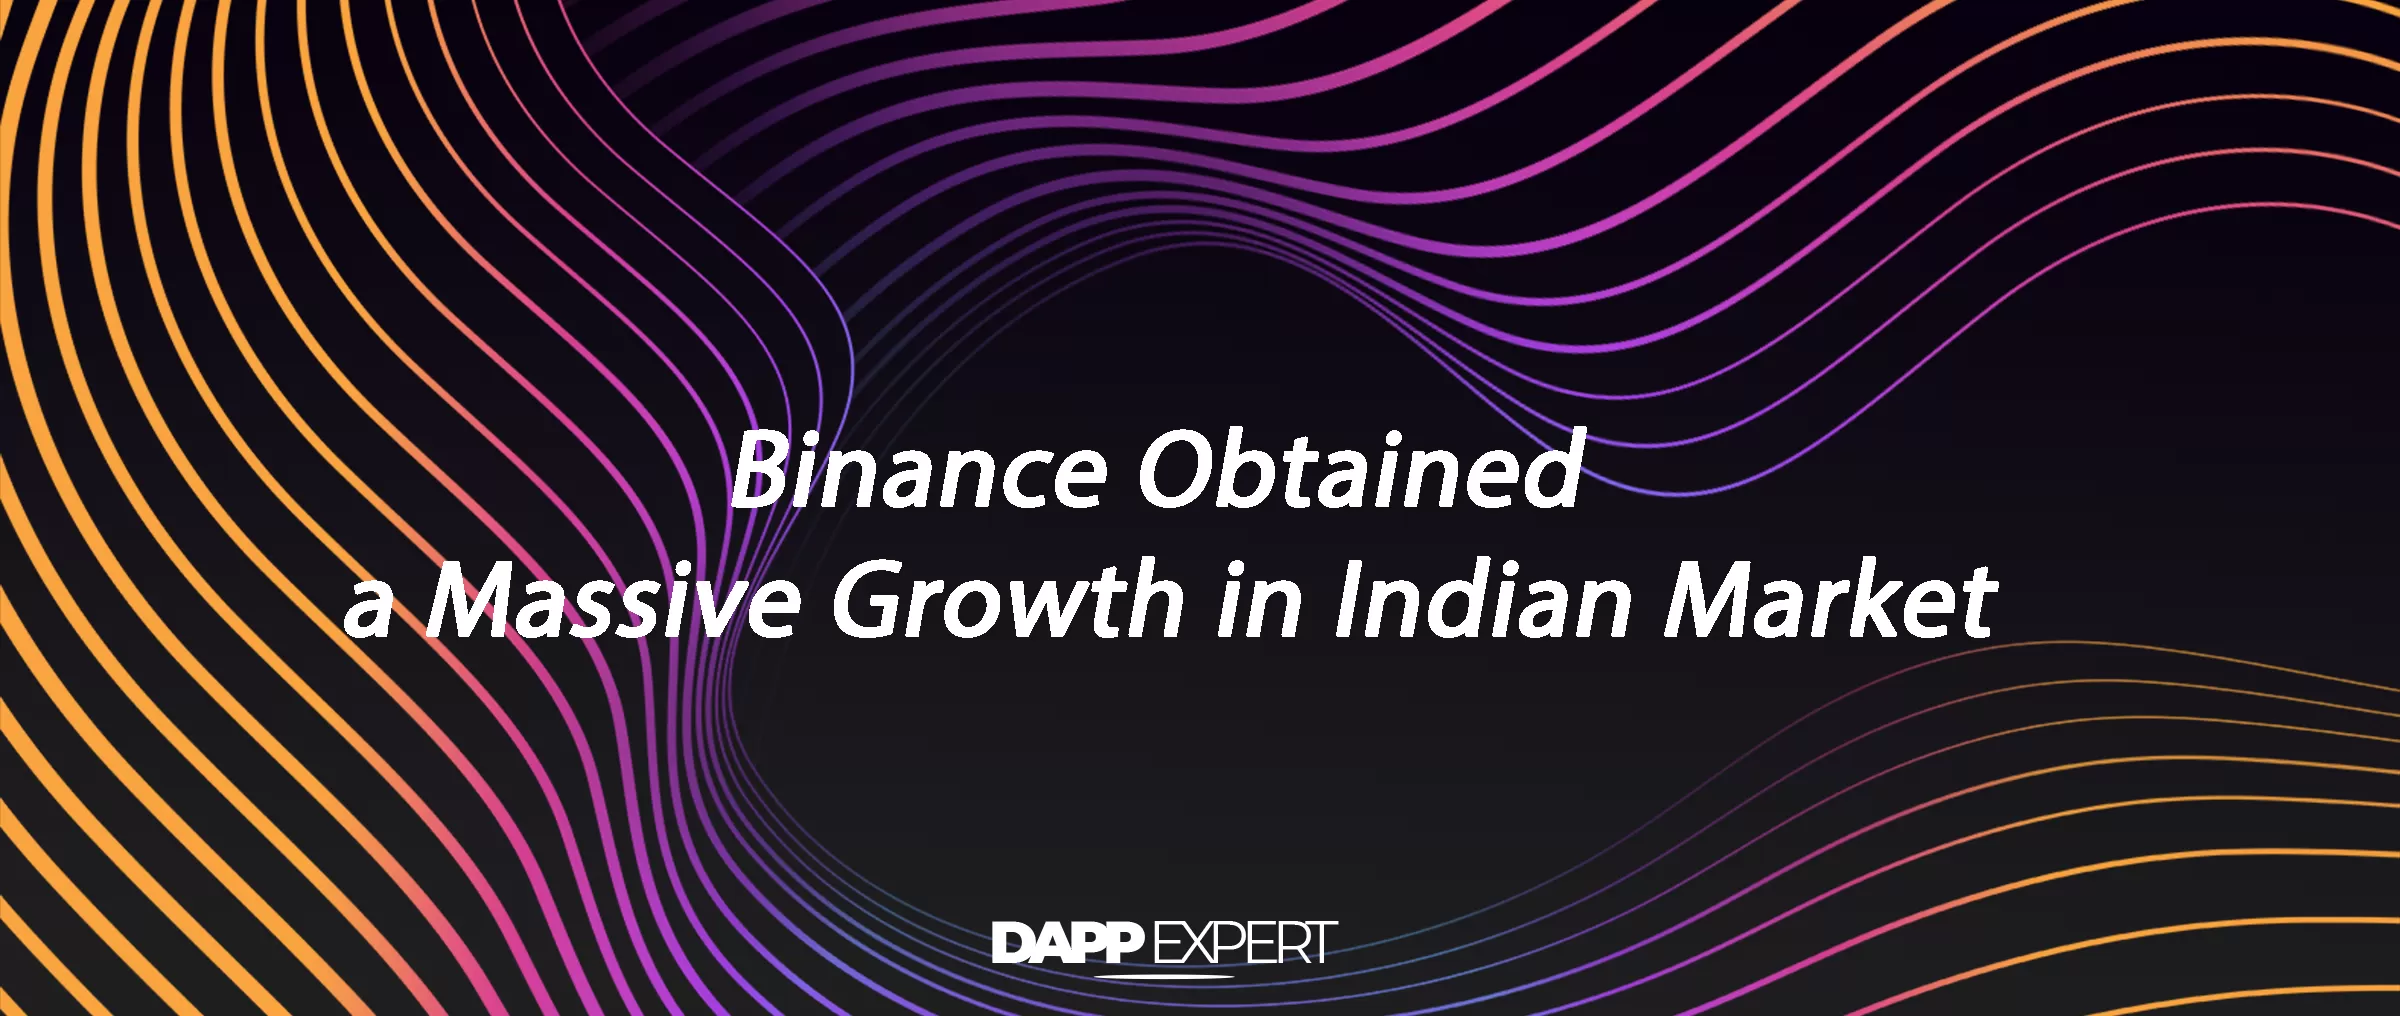 Binance Obtained a Massive Growth in Indian Market